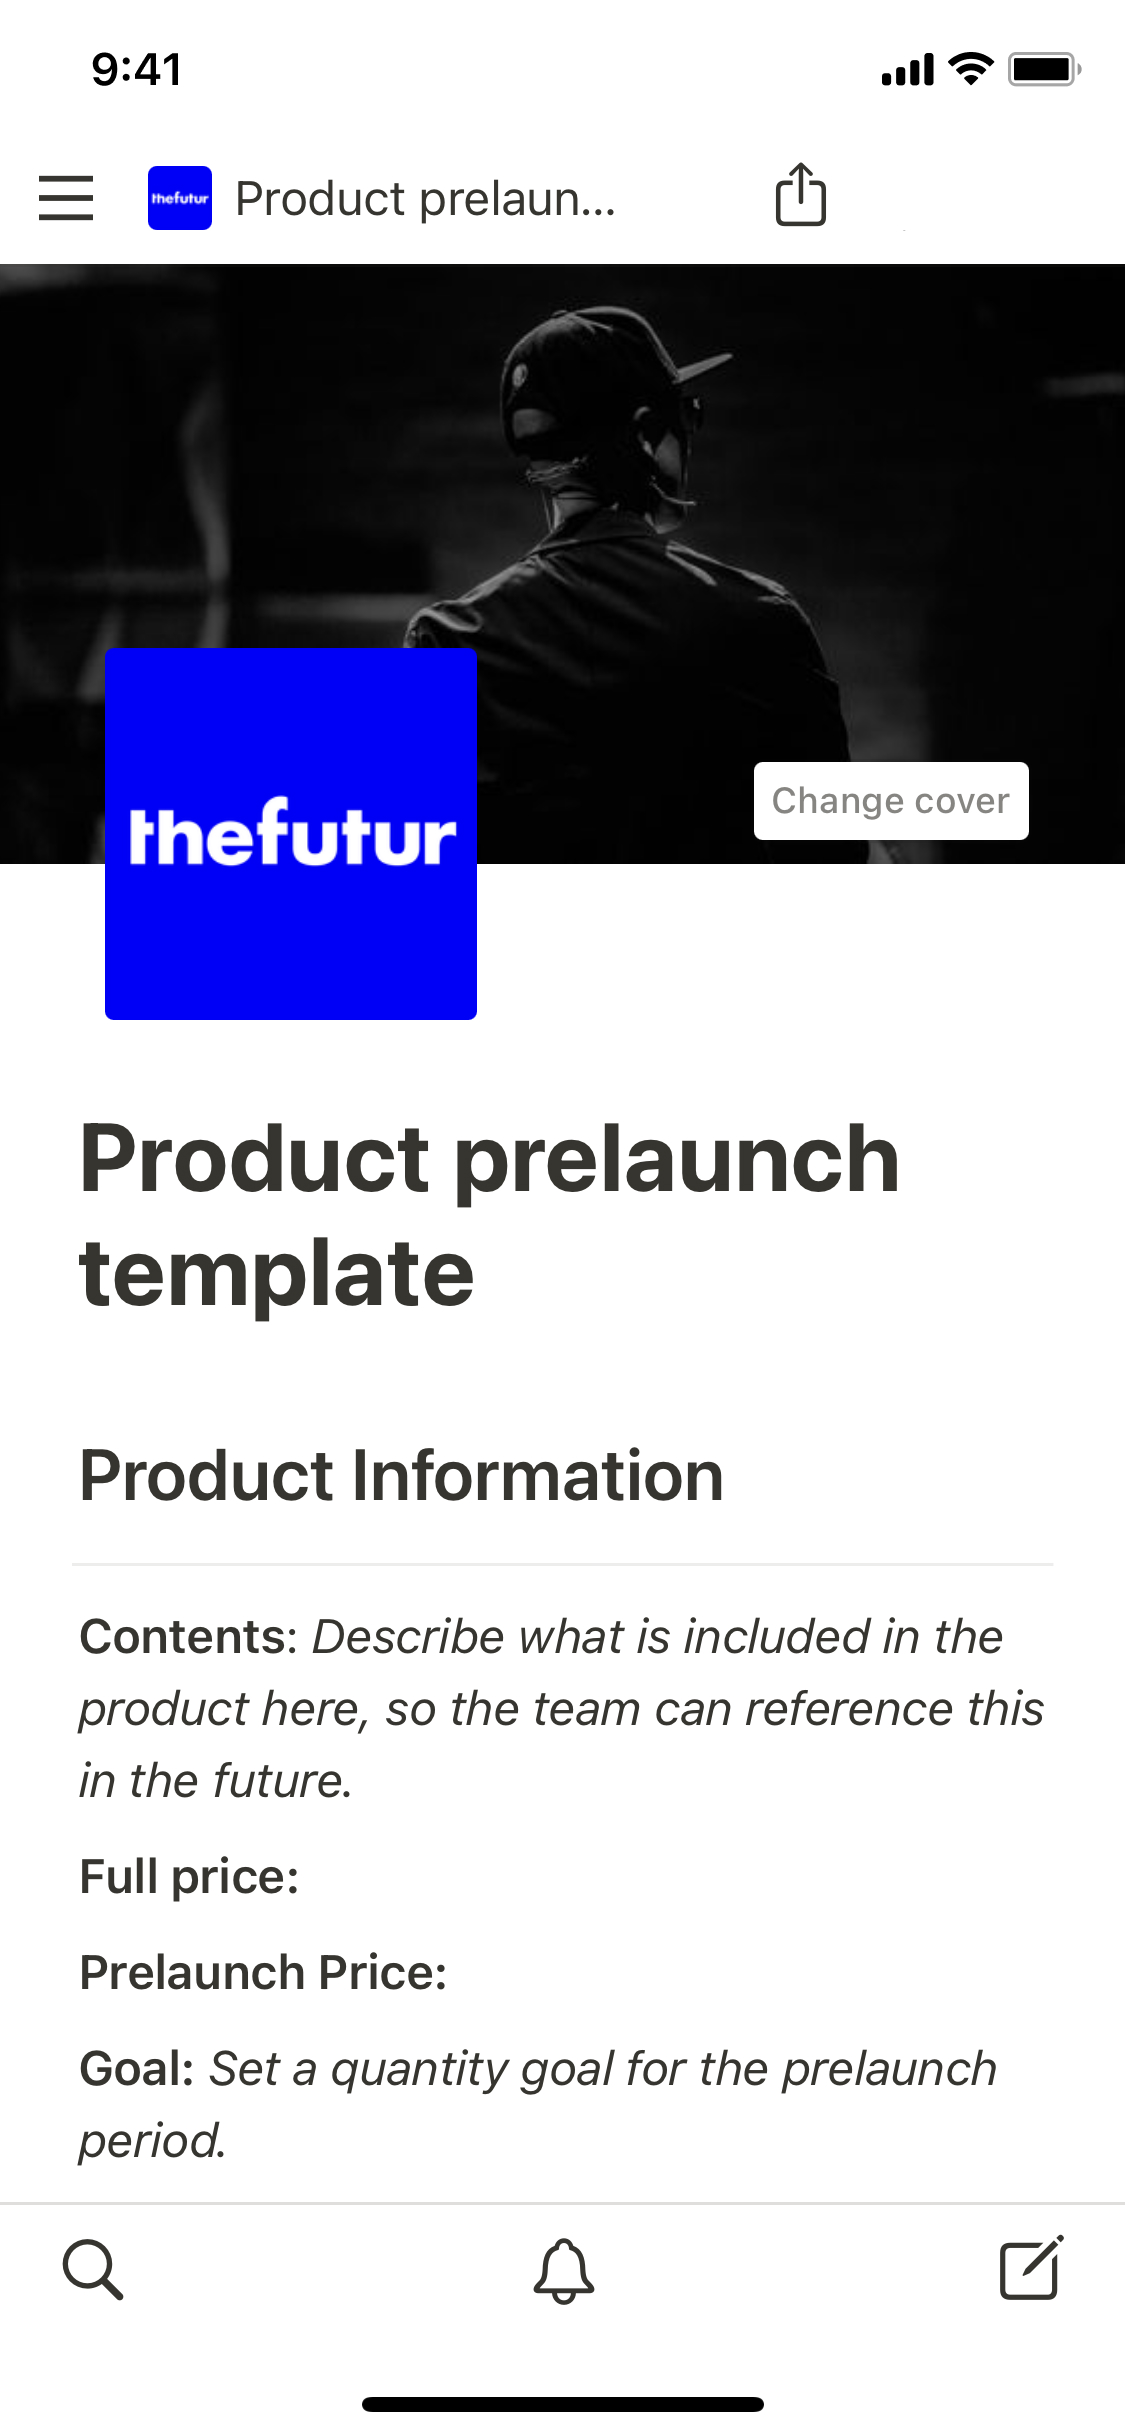 The mobile image for the Product prelaunch template